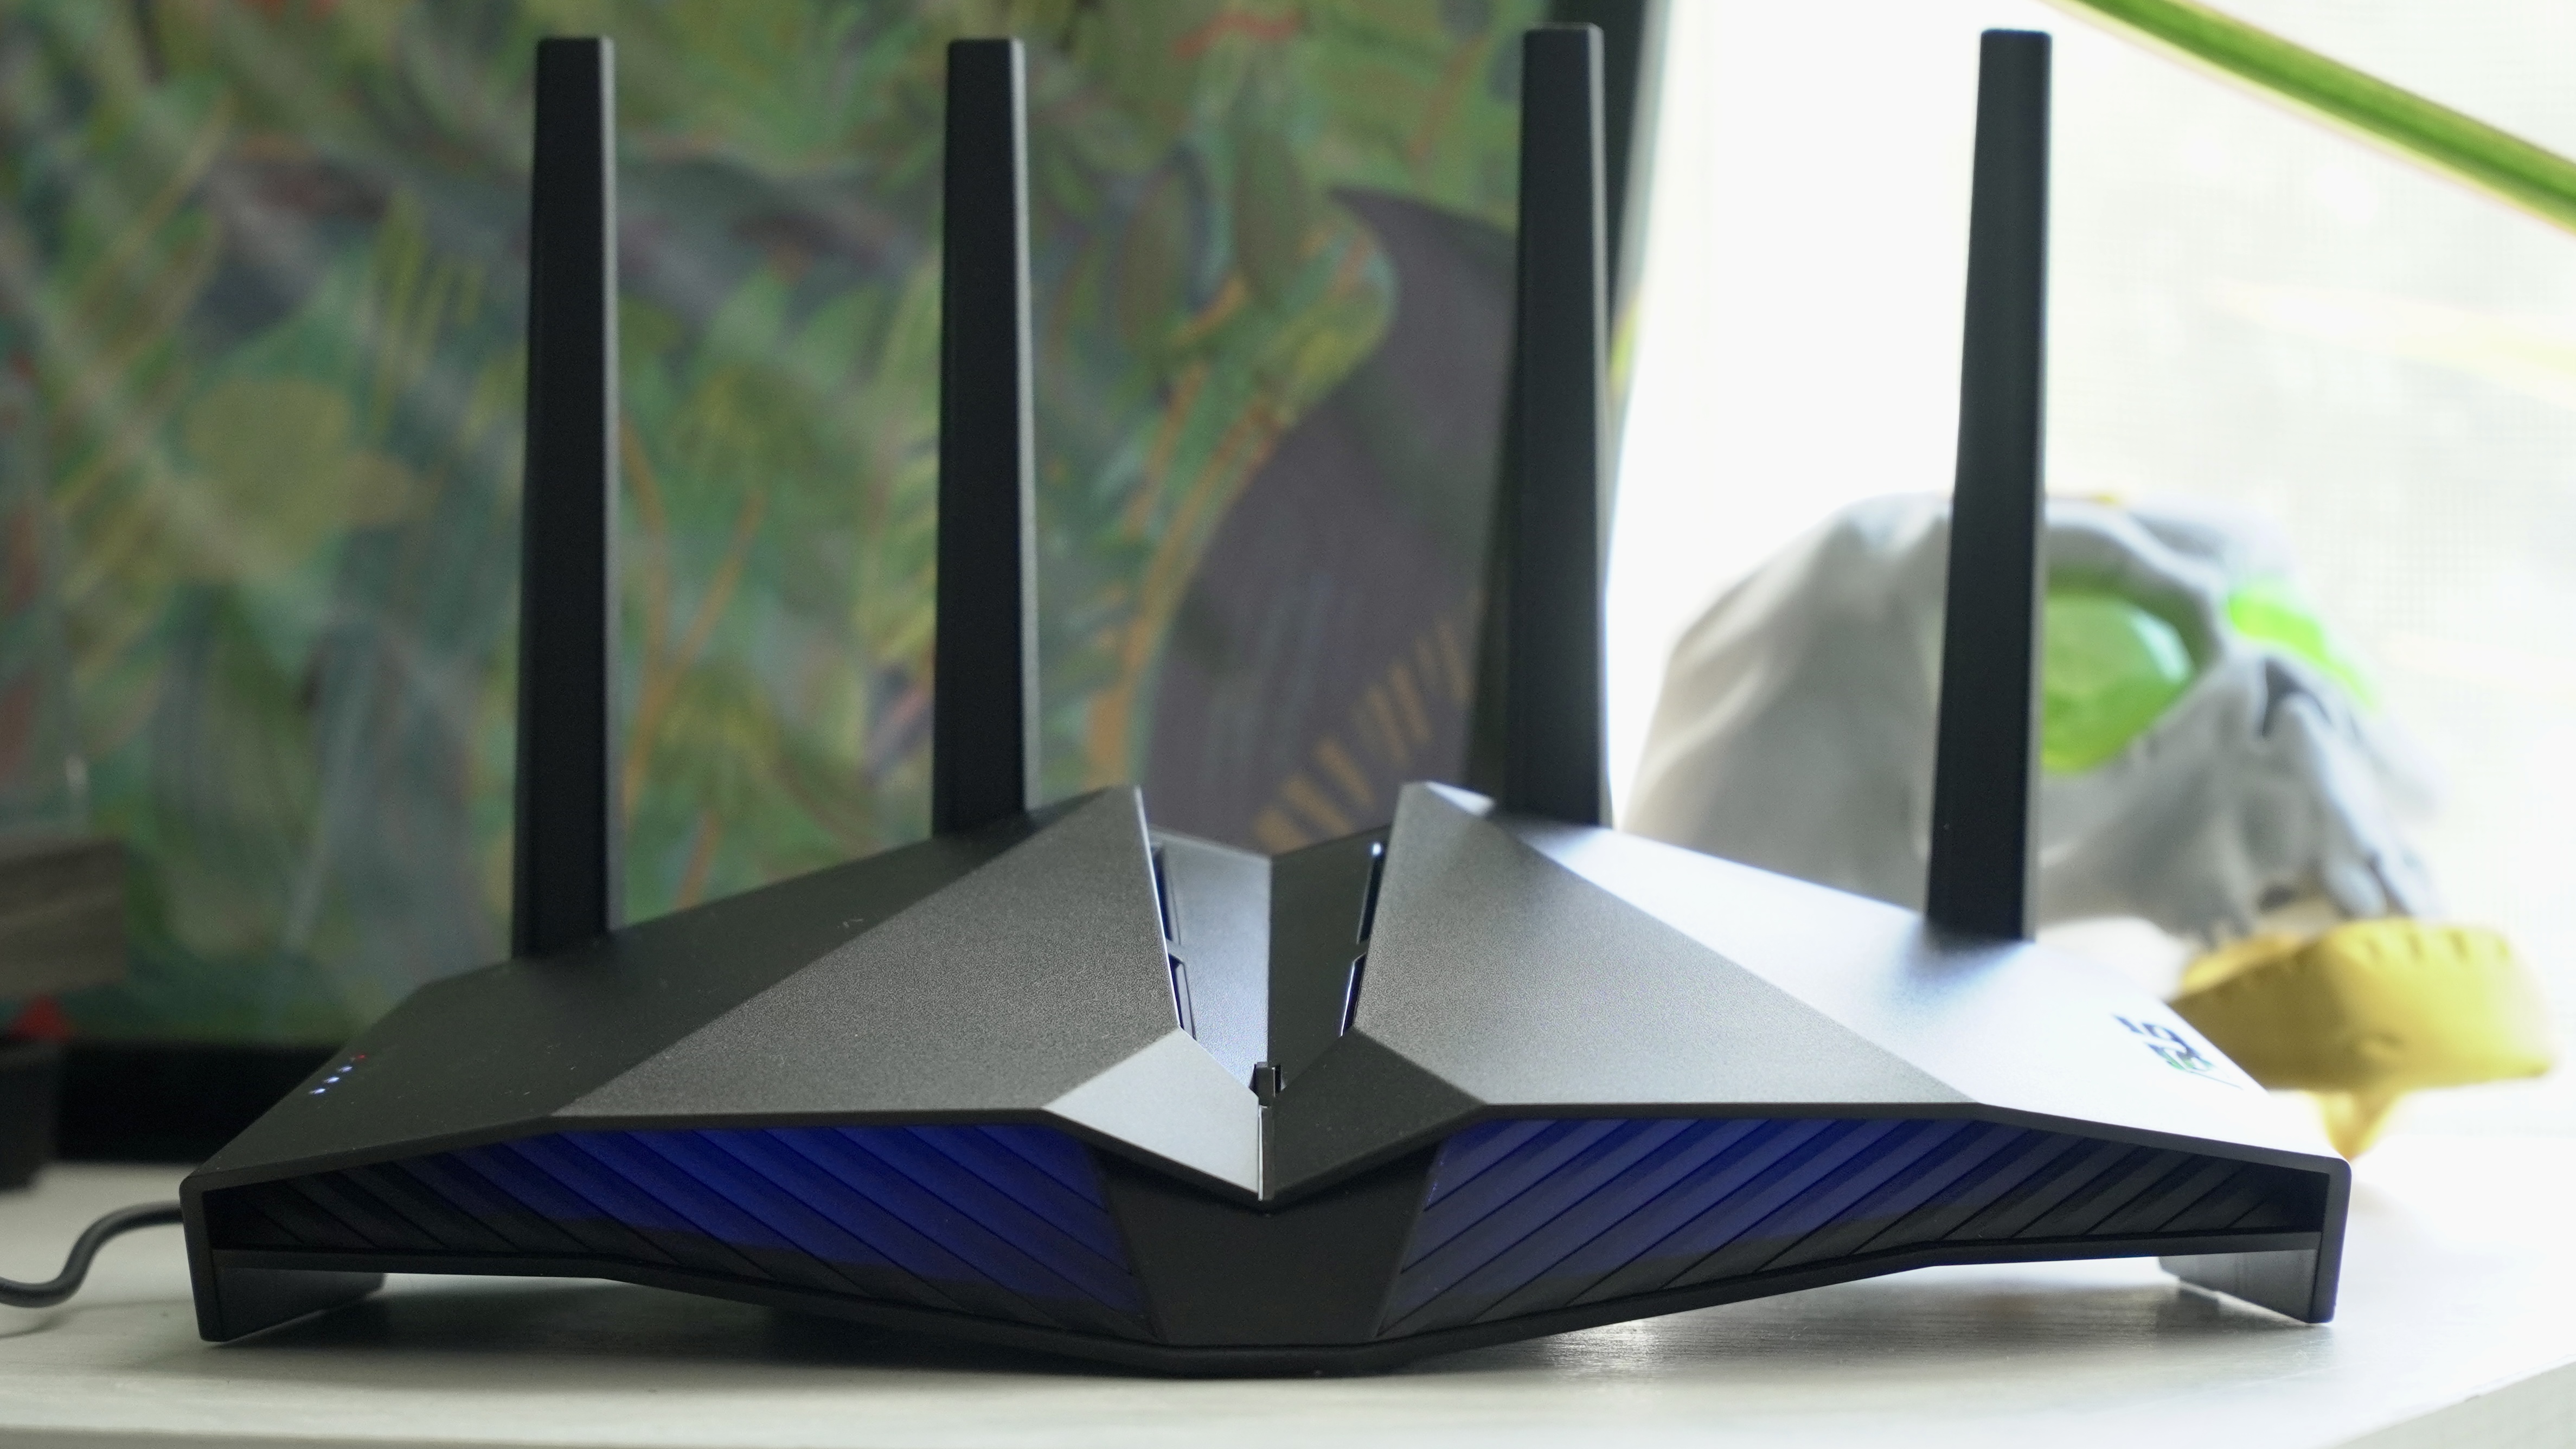 The Asus RT82U is a compact and powerful Wi-Fi 6 router